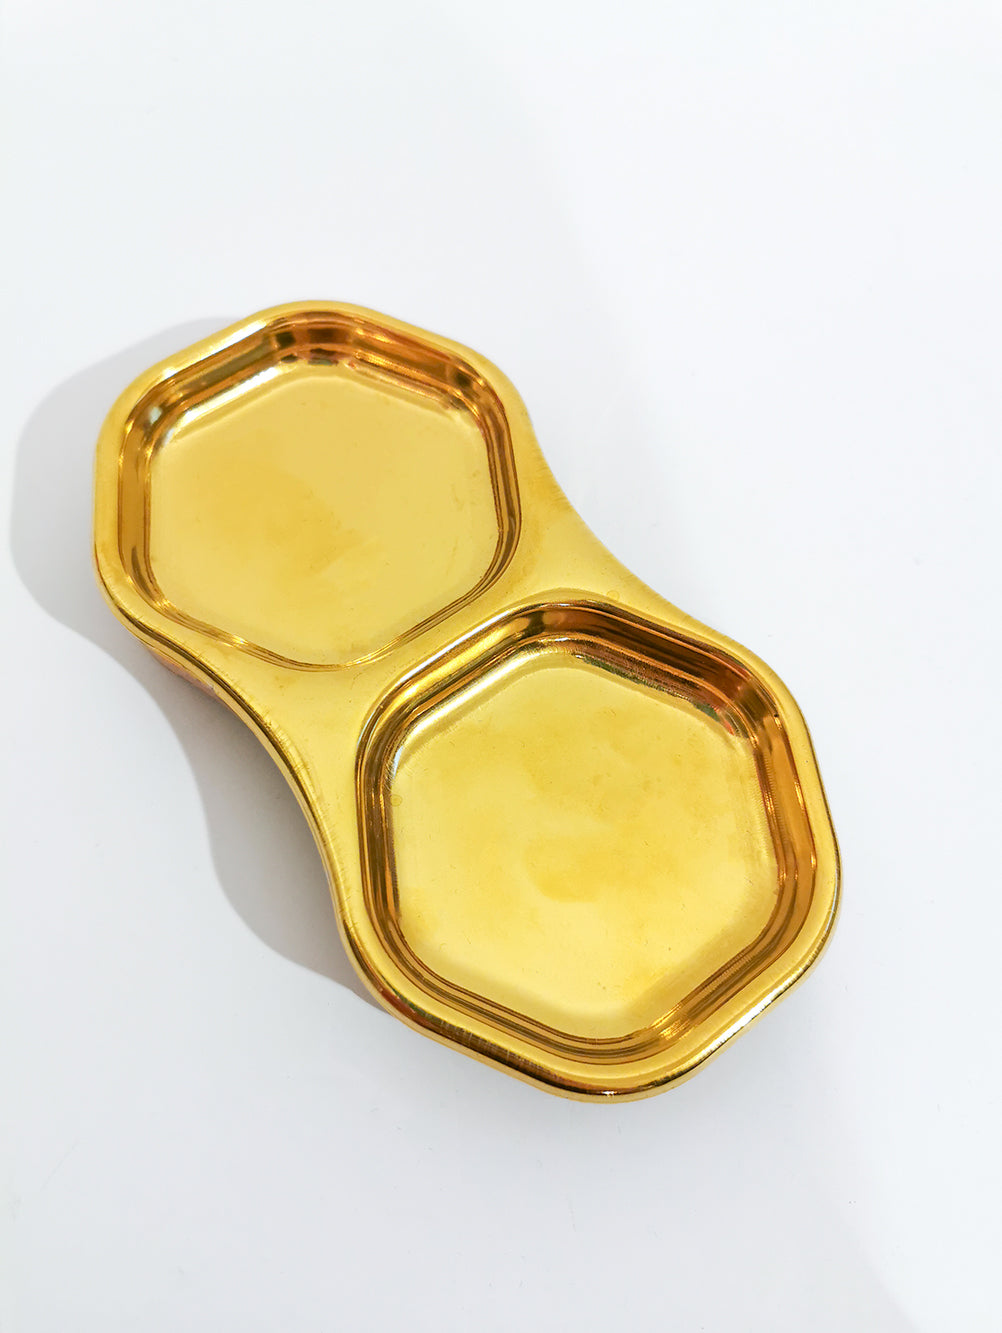 Condiments Saucer - Gold - Gifts by Art Tree